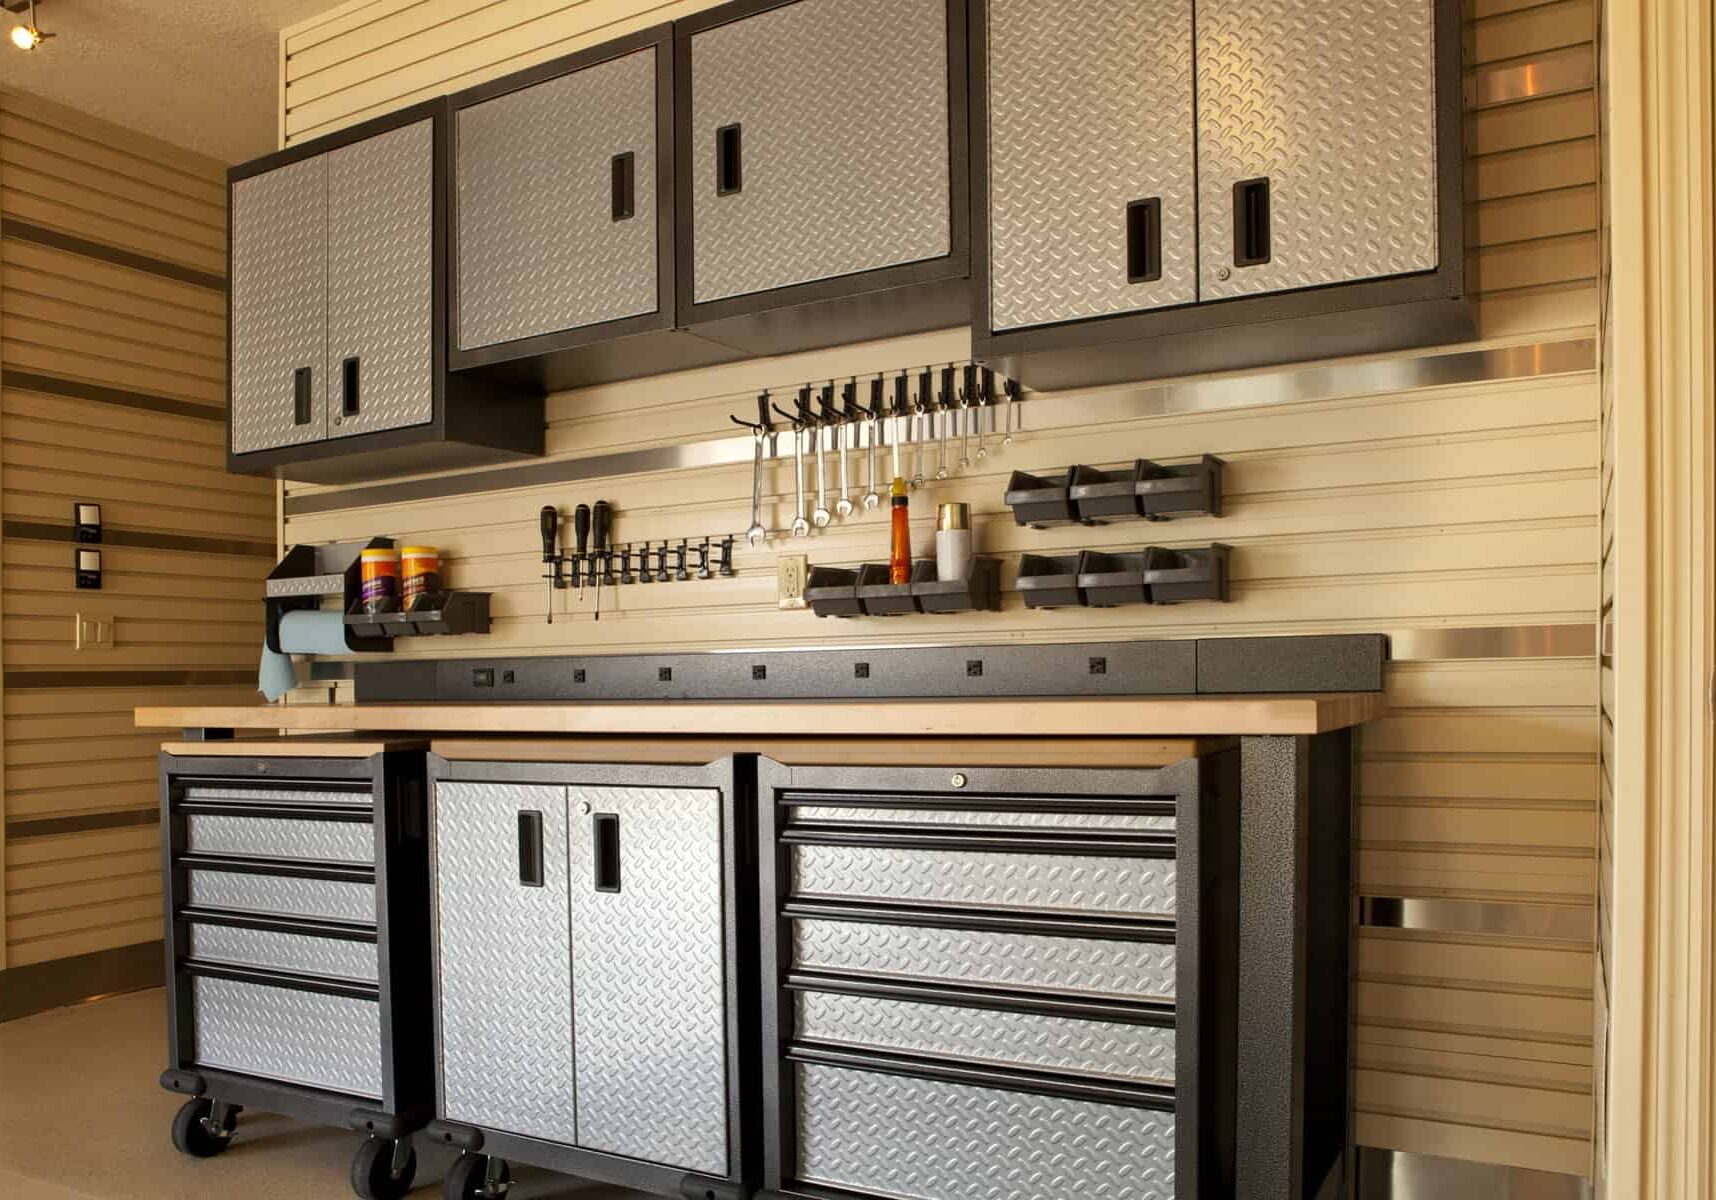 "Garage workspace with cabinets, countertop and tools"